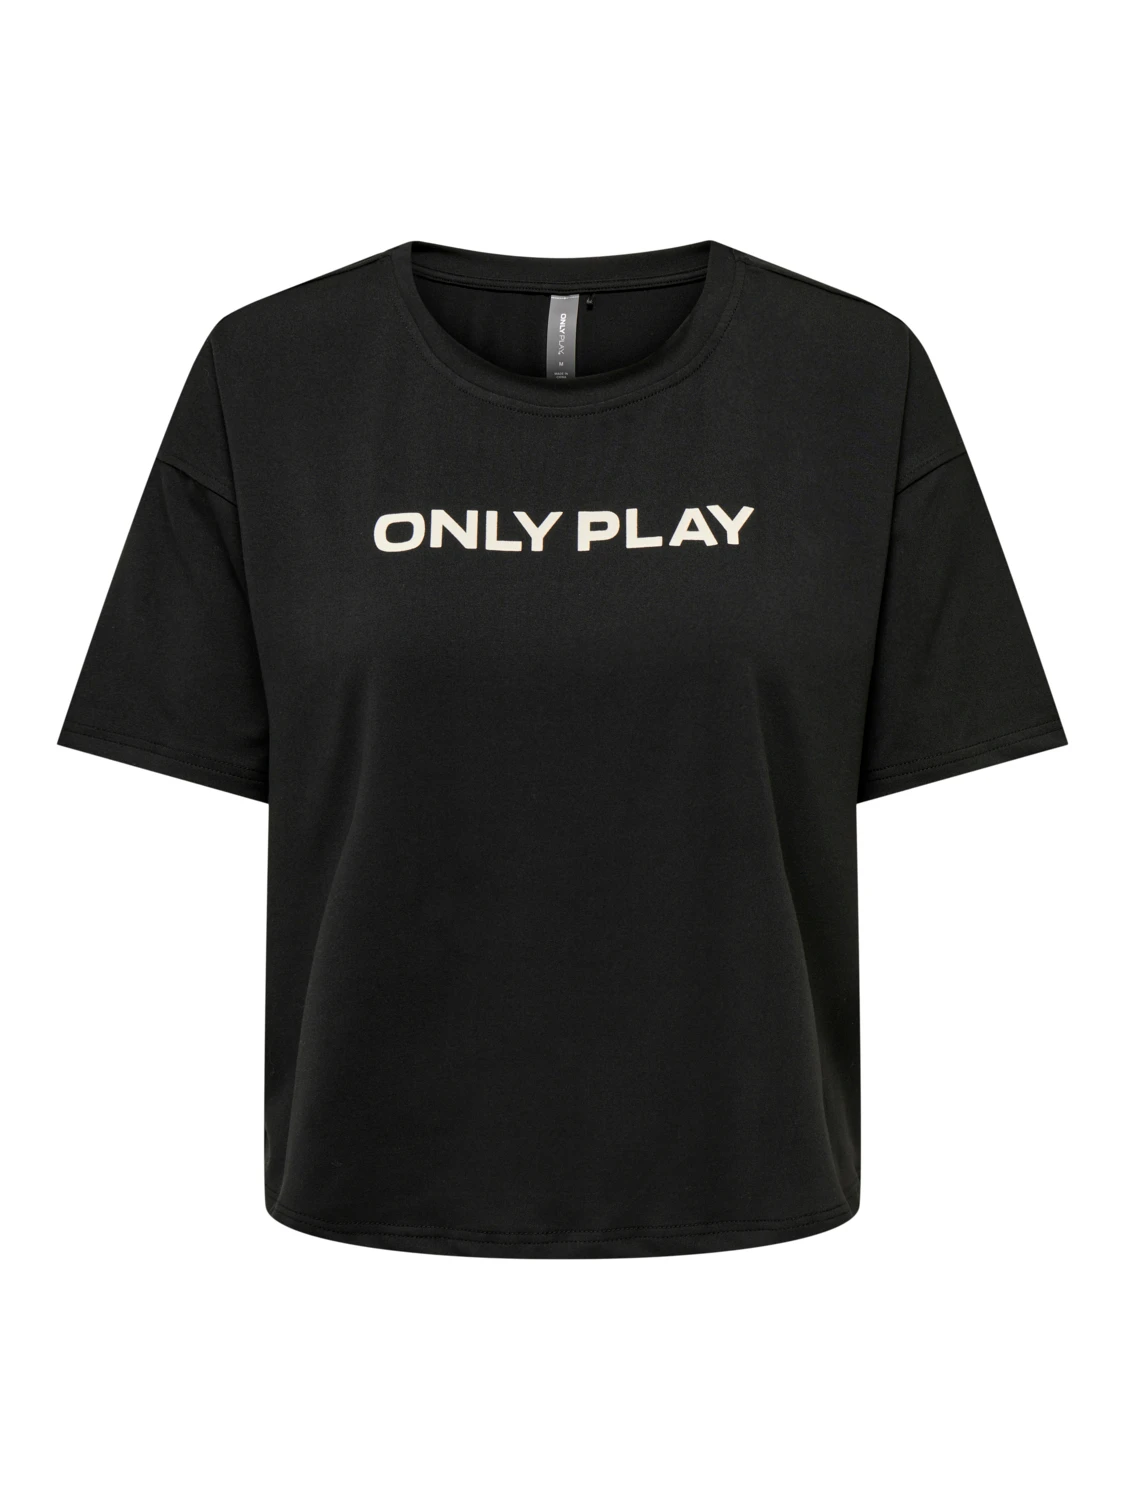 ONLY PLAY Font logo short ss train tee 15304595